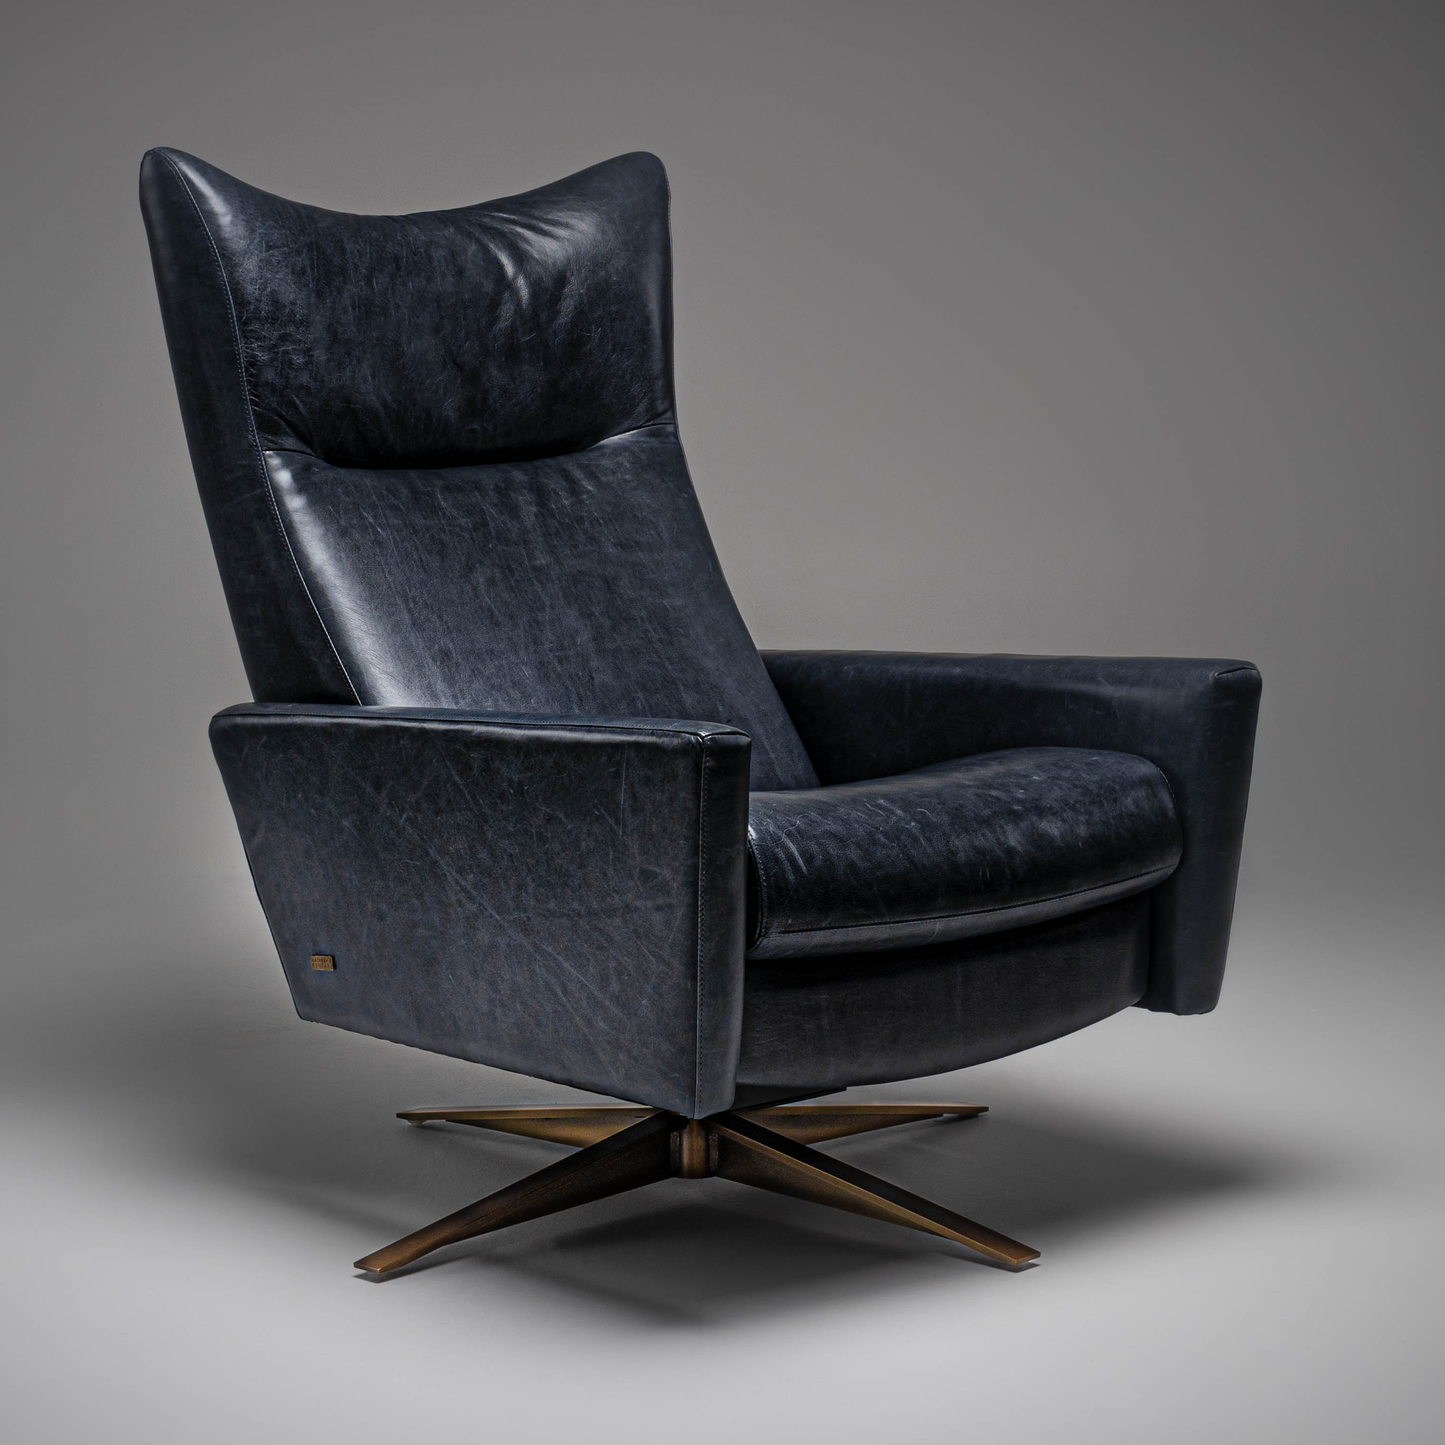 Status Spec Sheet | Comfort Air motion chair by American Leather in Black Leather